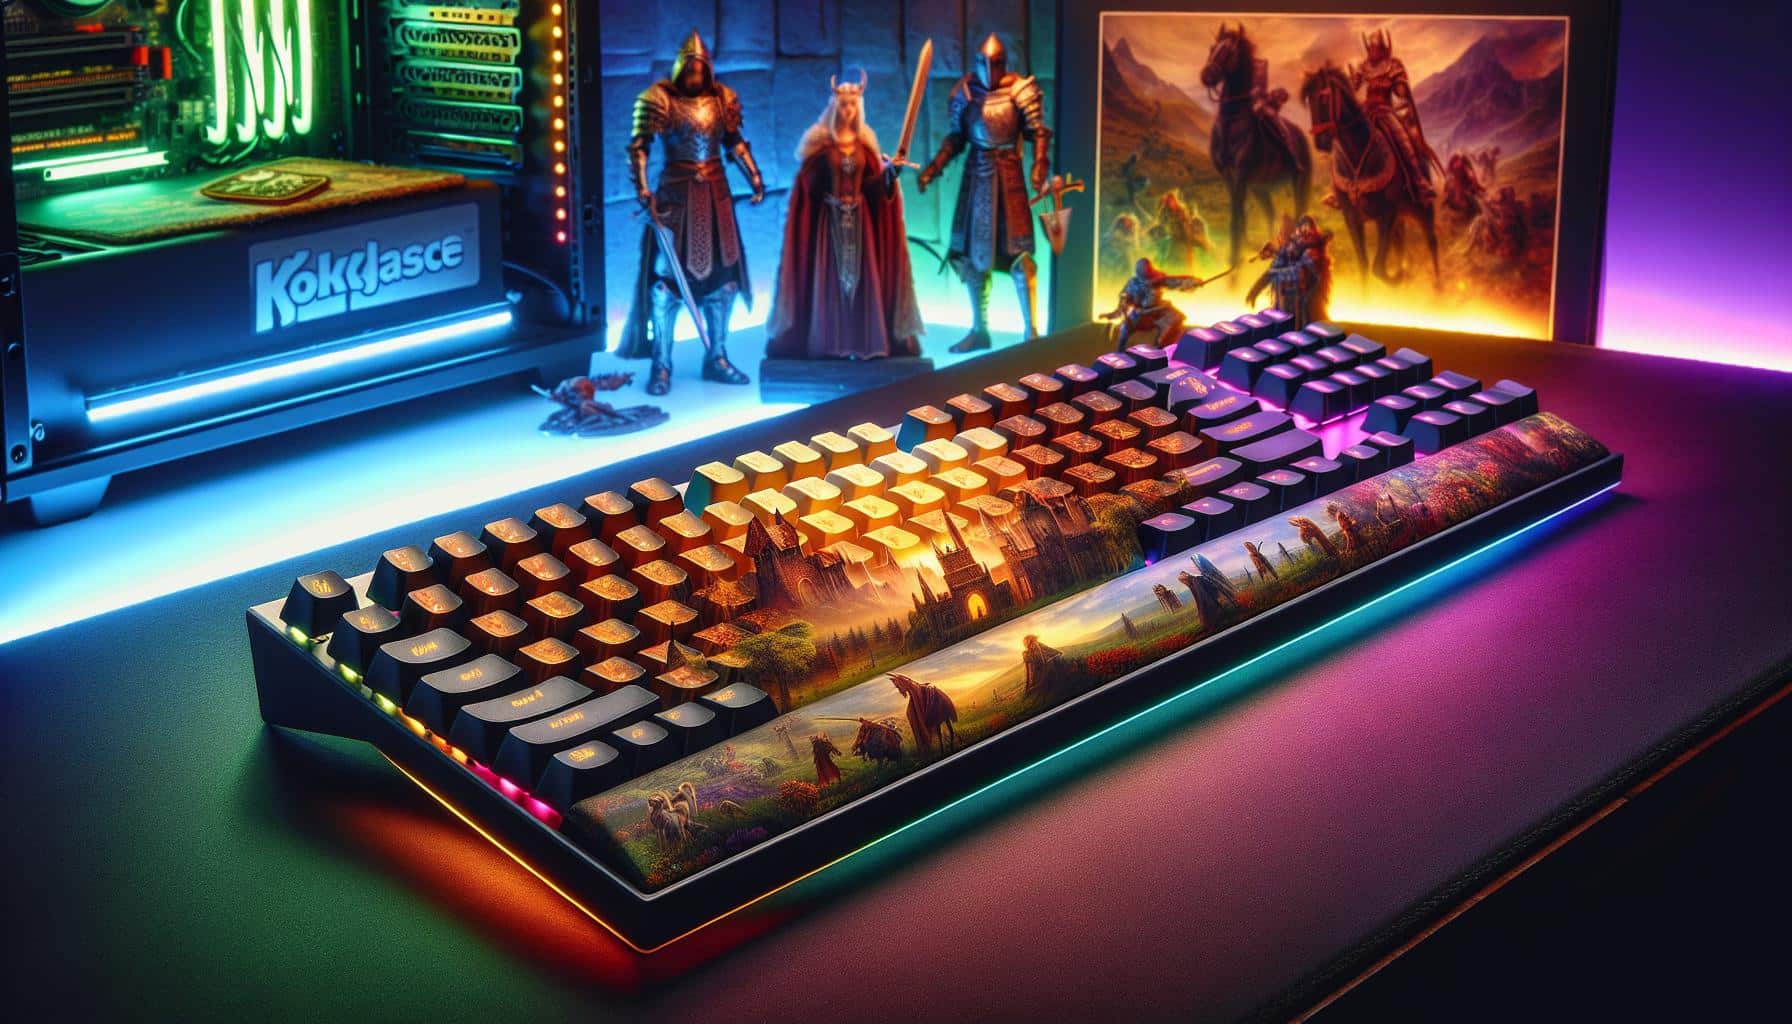 "The Rohan Gaming Keyboard: A Must-Have for Tolkien Fans" | FinOracle